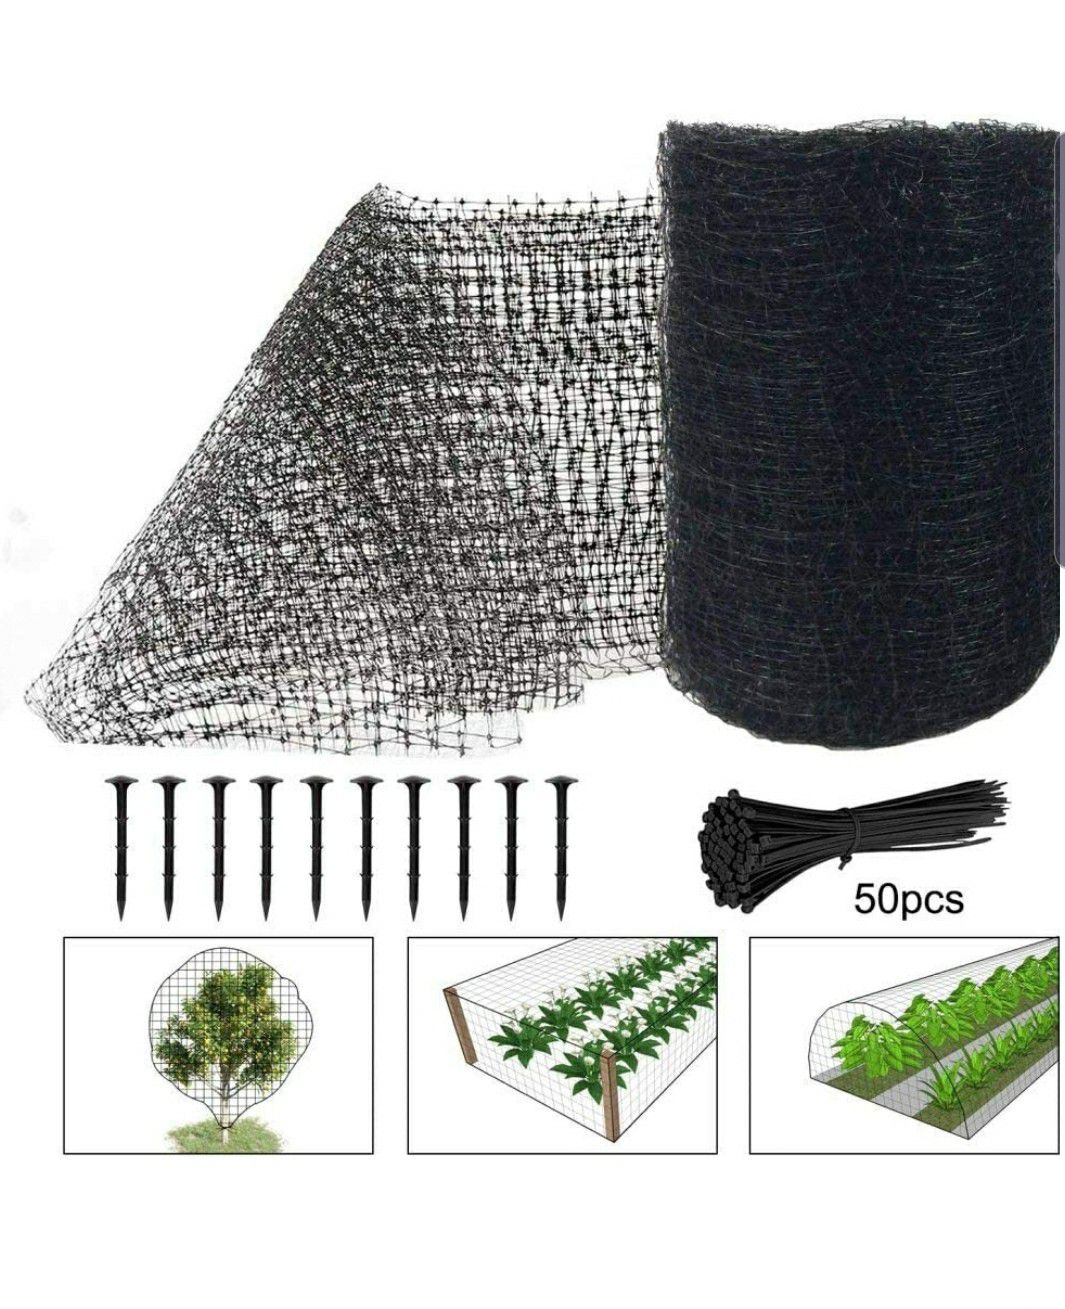 6.8ft X 65ft Anti Bird Netting, Pond Net with 50pcs Cable Ties - Protect Your Garden Vegetables Fruit Plants Ponds